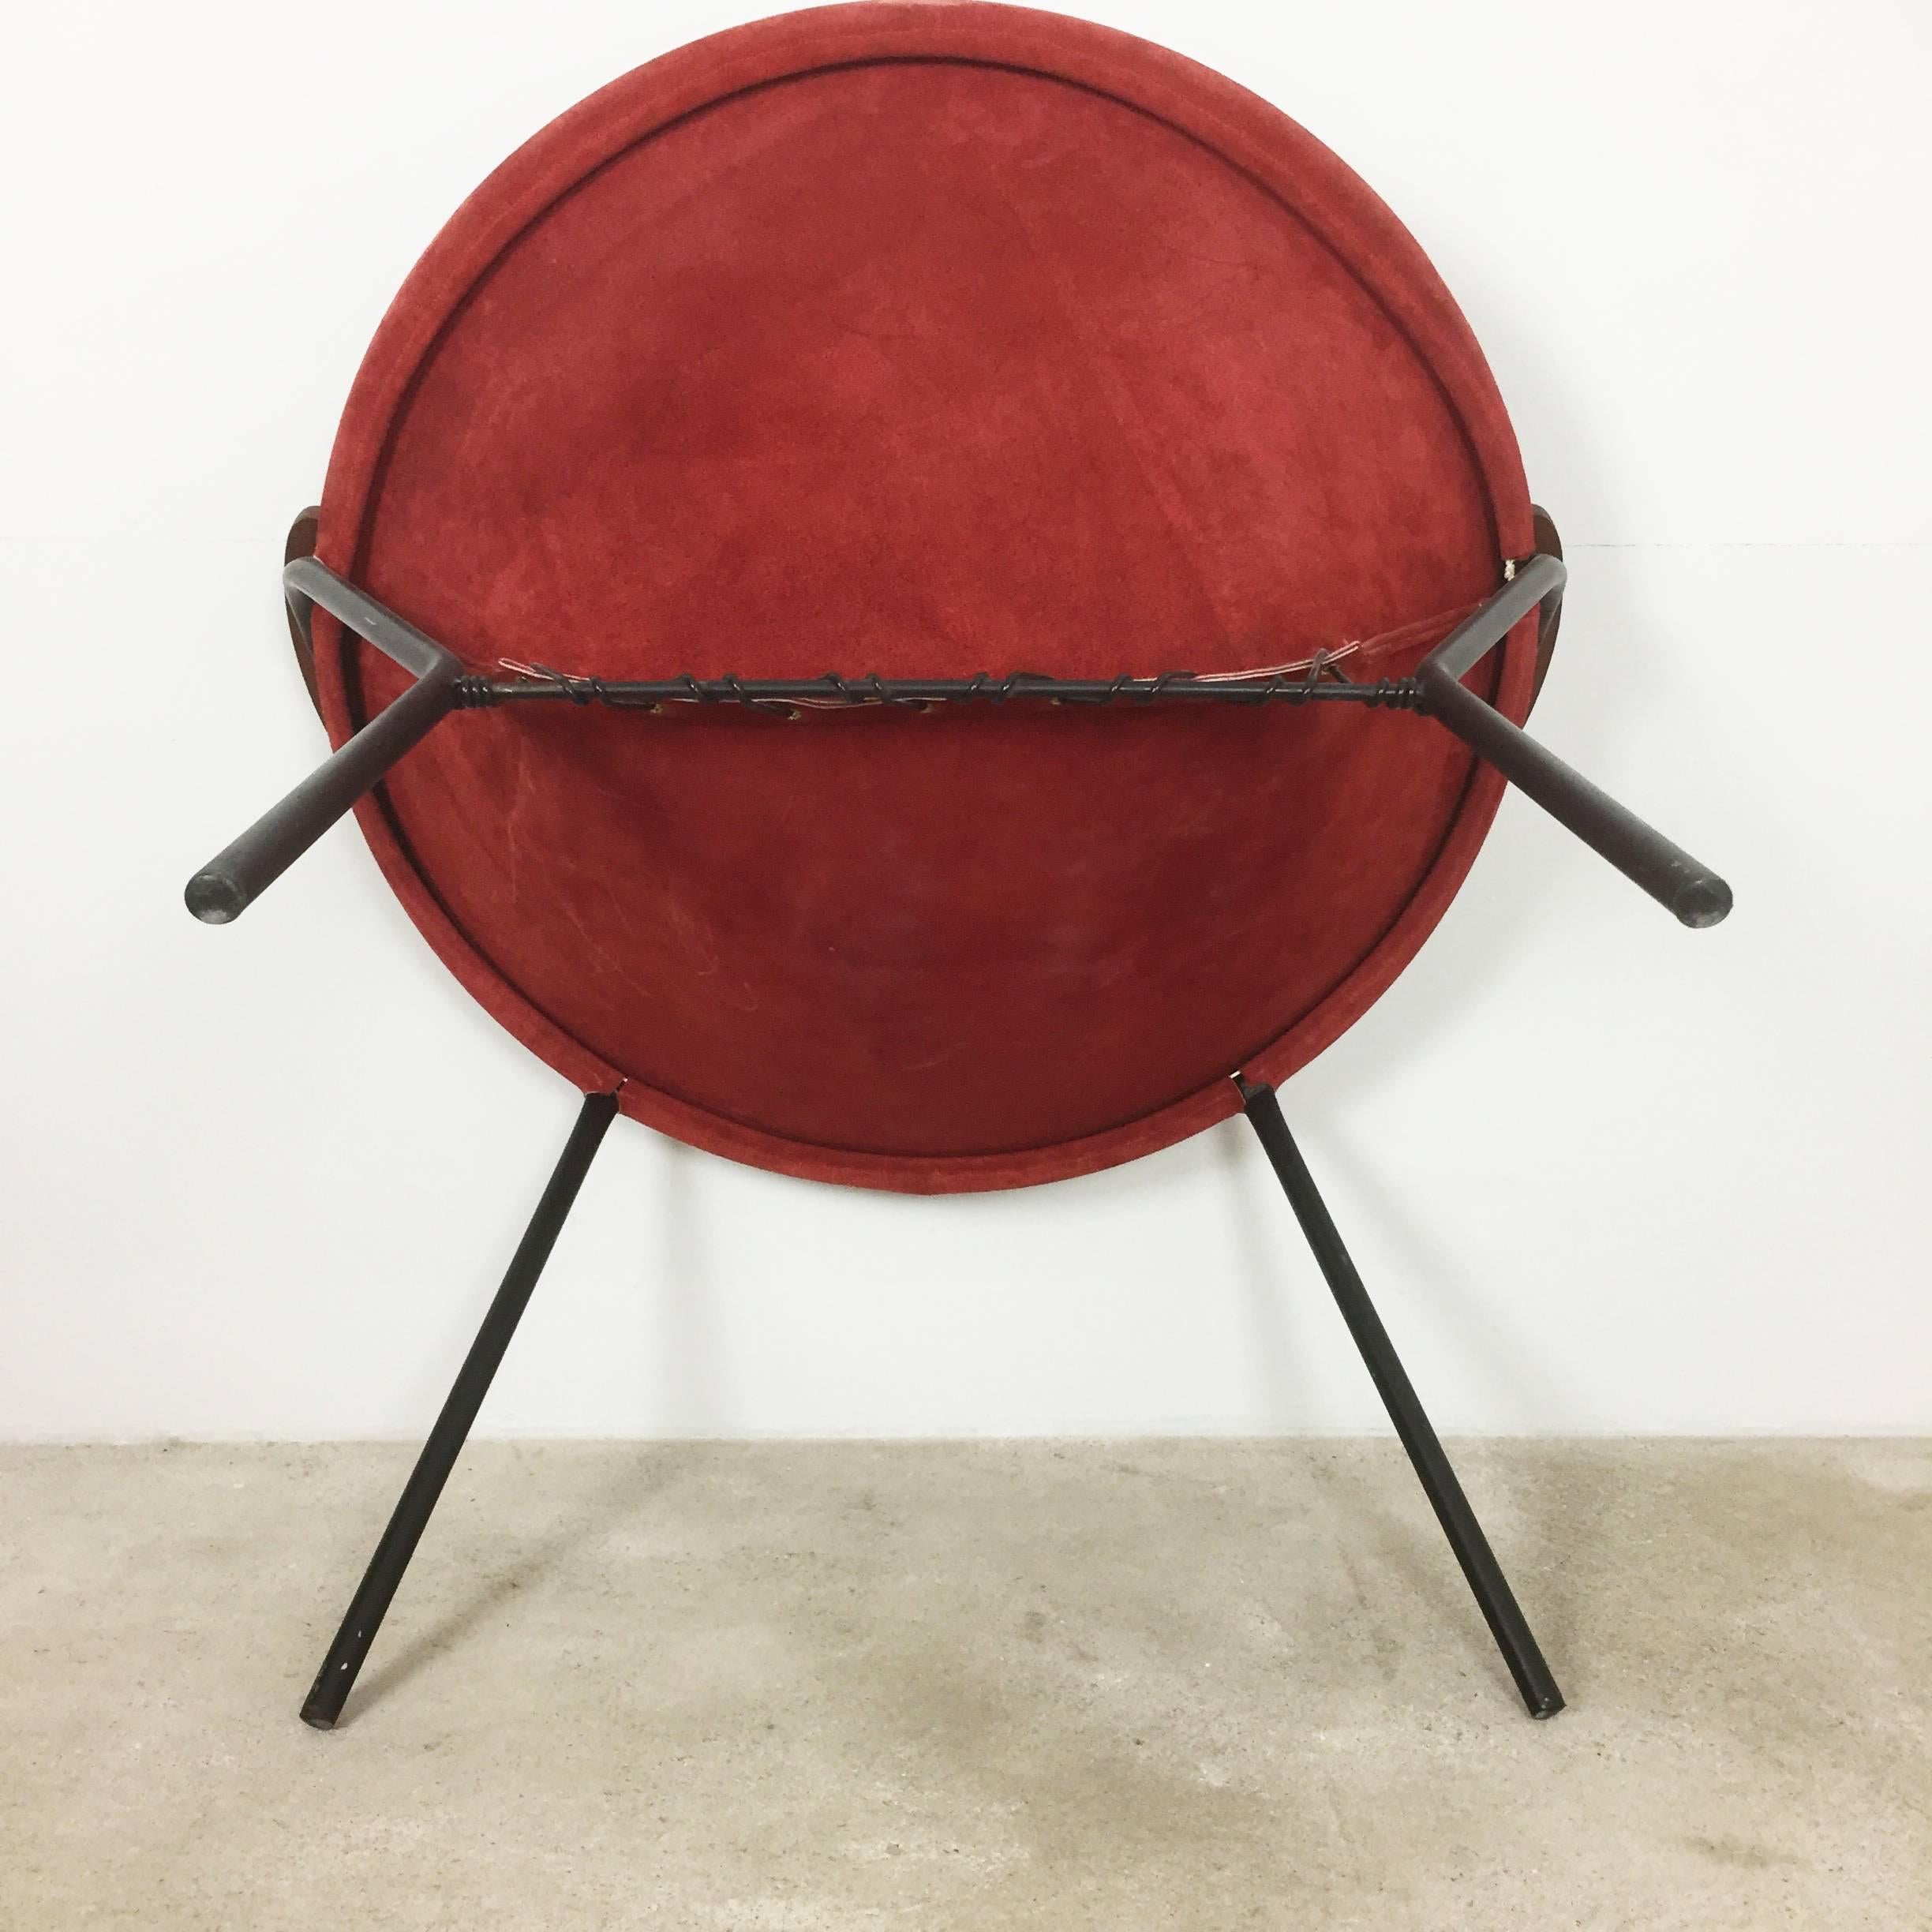 20th Century Vintage 1950s Real Red Leather Balloon Easy Chair by Hans Olsen for LEA, Denmark